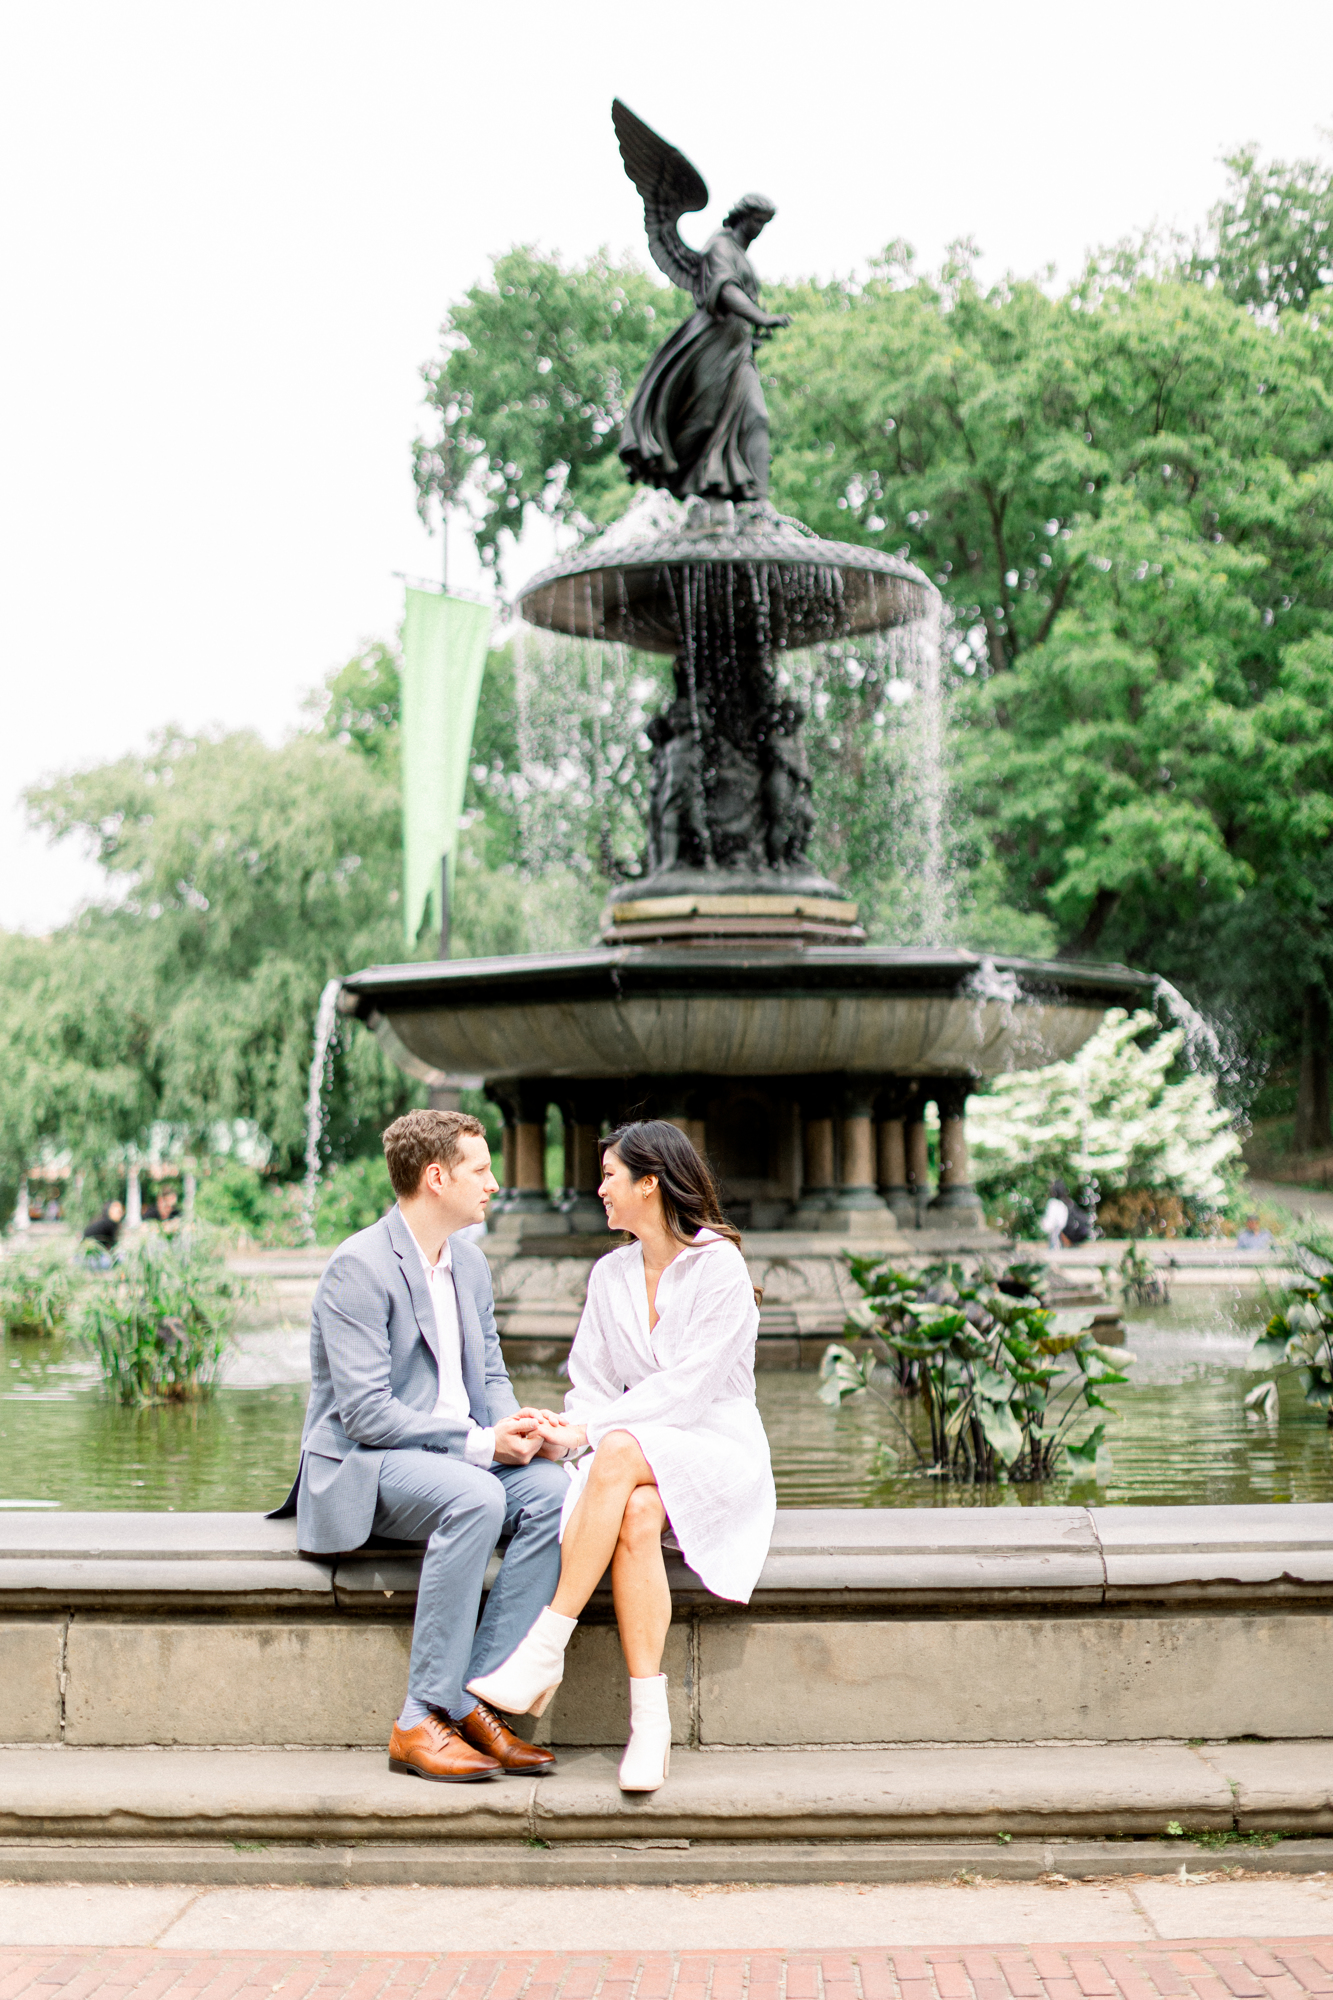 Wonderful Central Park Rowboat Engagement Photography in New York